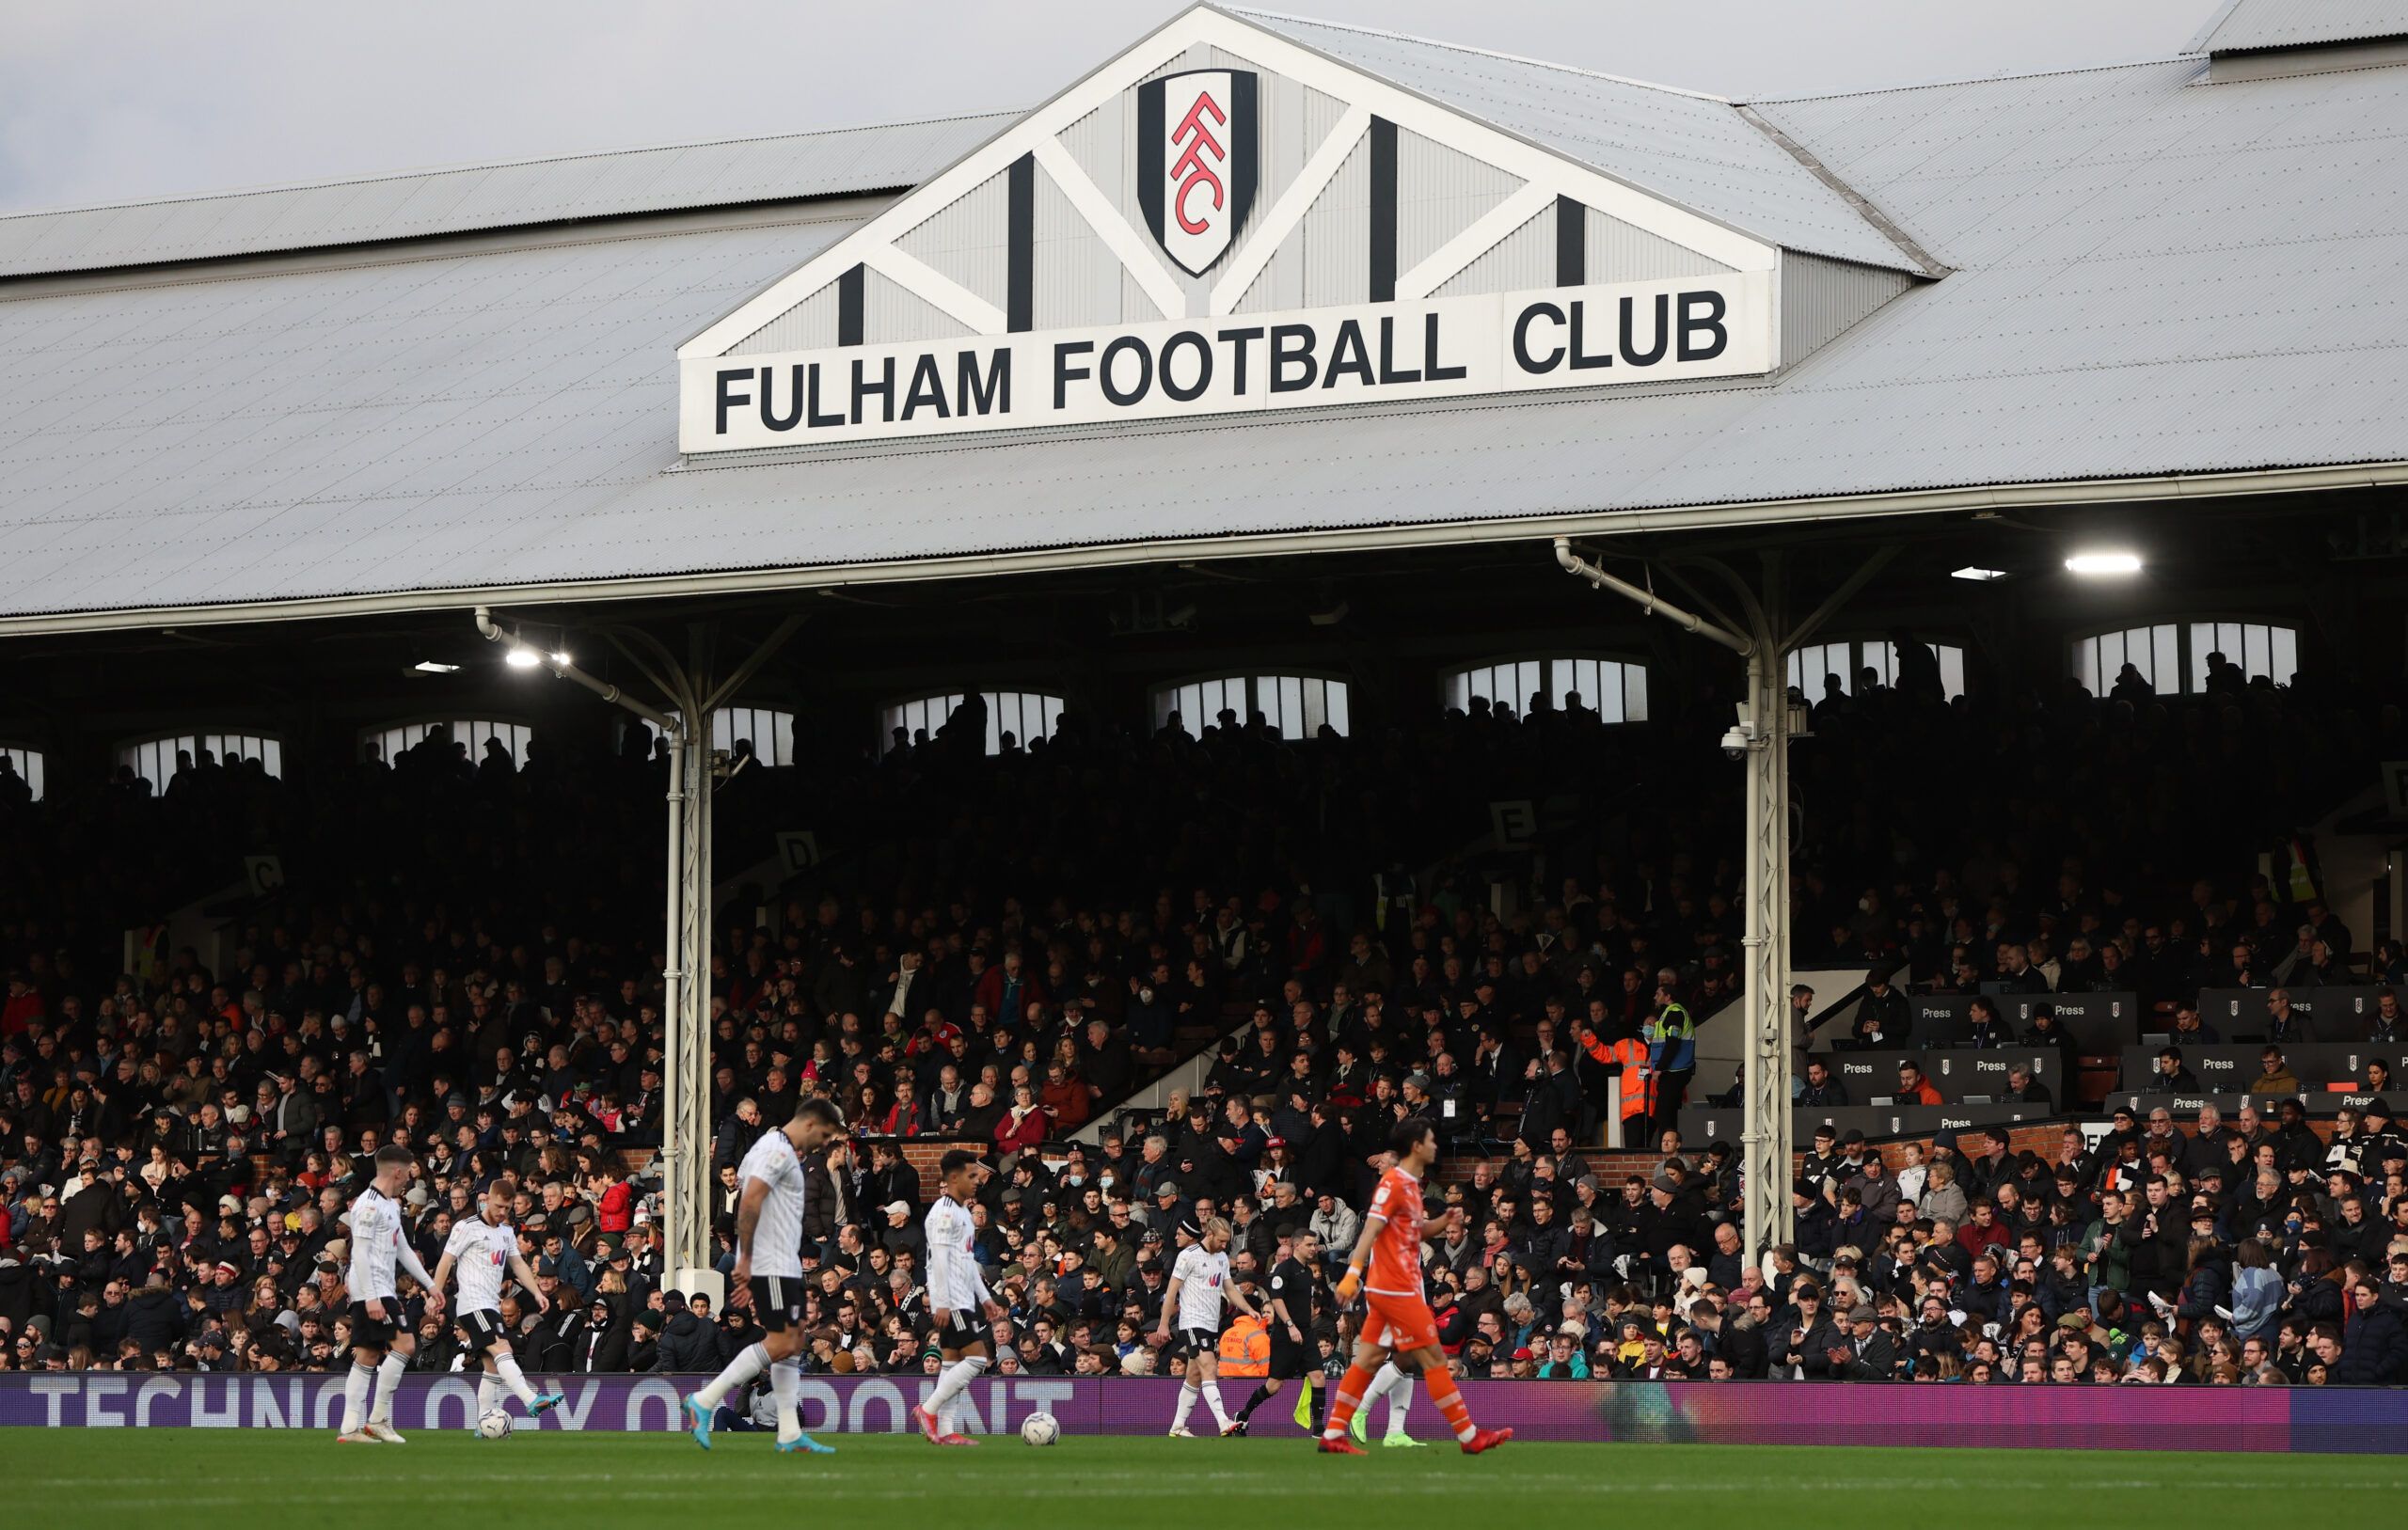 Soccer Football - Championship - Fulham v Blackpool - Craven Cottage, London, Britain - January 29, 2022 General view as play is stopped due to a medical emergency in the stands Action Images/Paul Childs EDITORIAL USE ONLY. No use with unauthorized audio, video, data, fixture lists, club/league logos or 'live' services. Online in-match use limited to 75 images, no video emulation. No use in betting, games or single club /league/player publications.  Please contact your account representative for